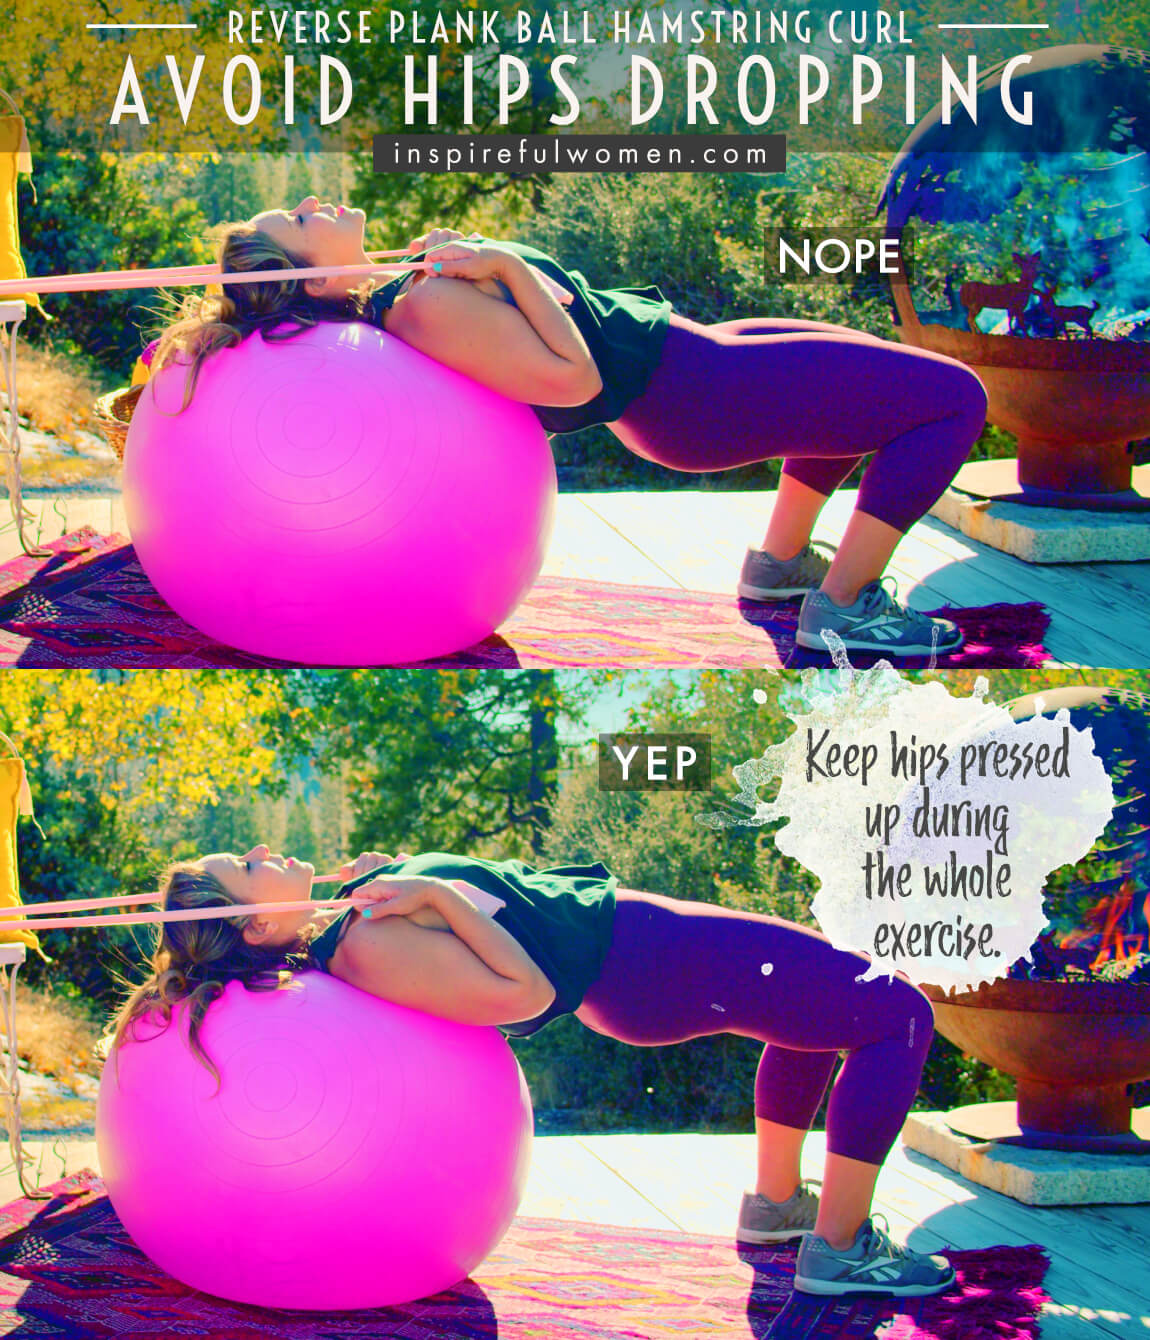 avoid-hips-dropping-reverse-plank-ball-hamstring-curl-common-mistakes